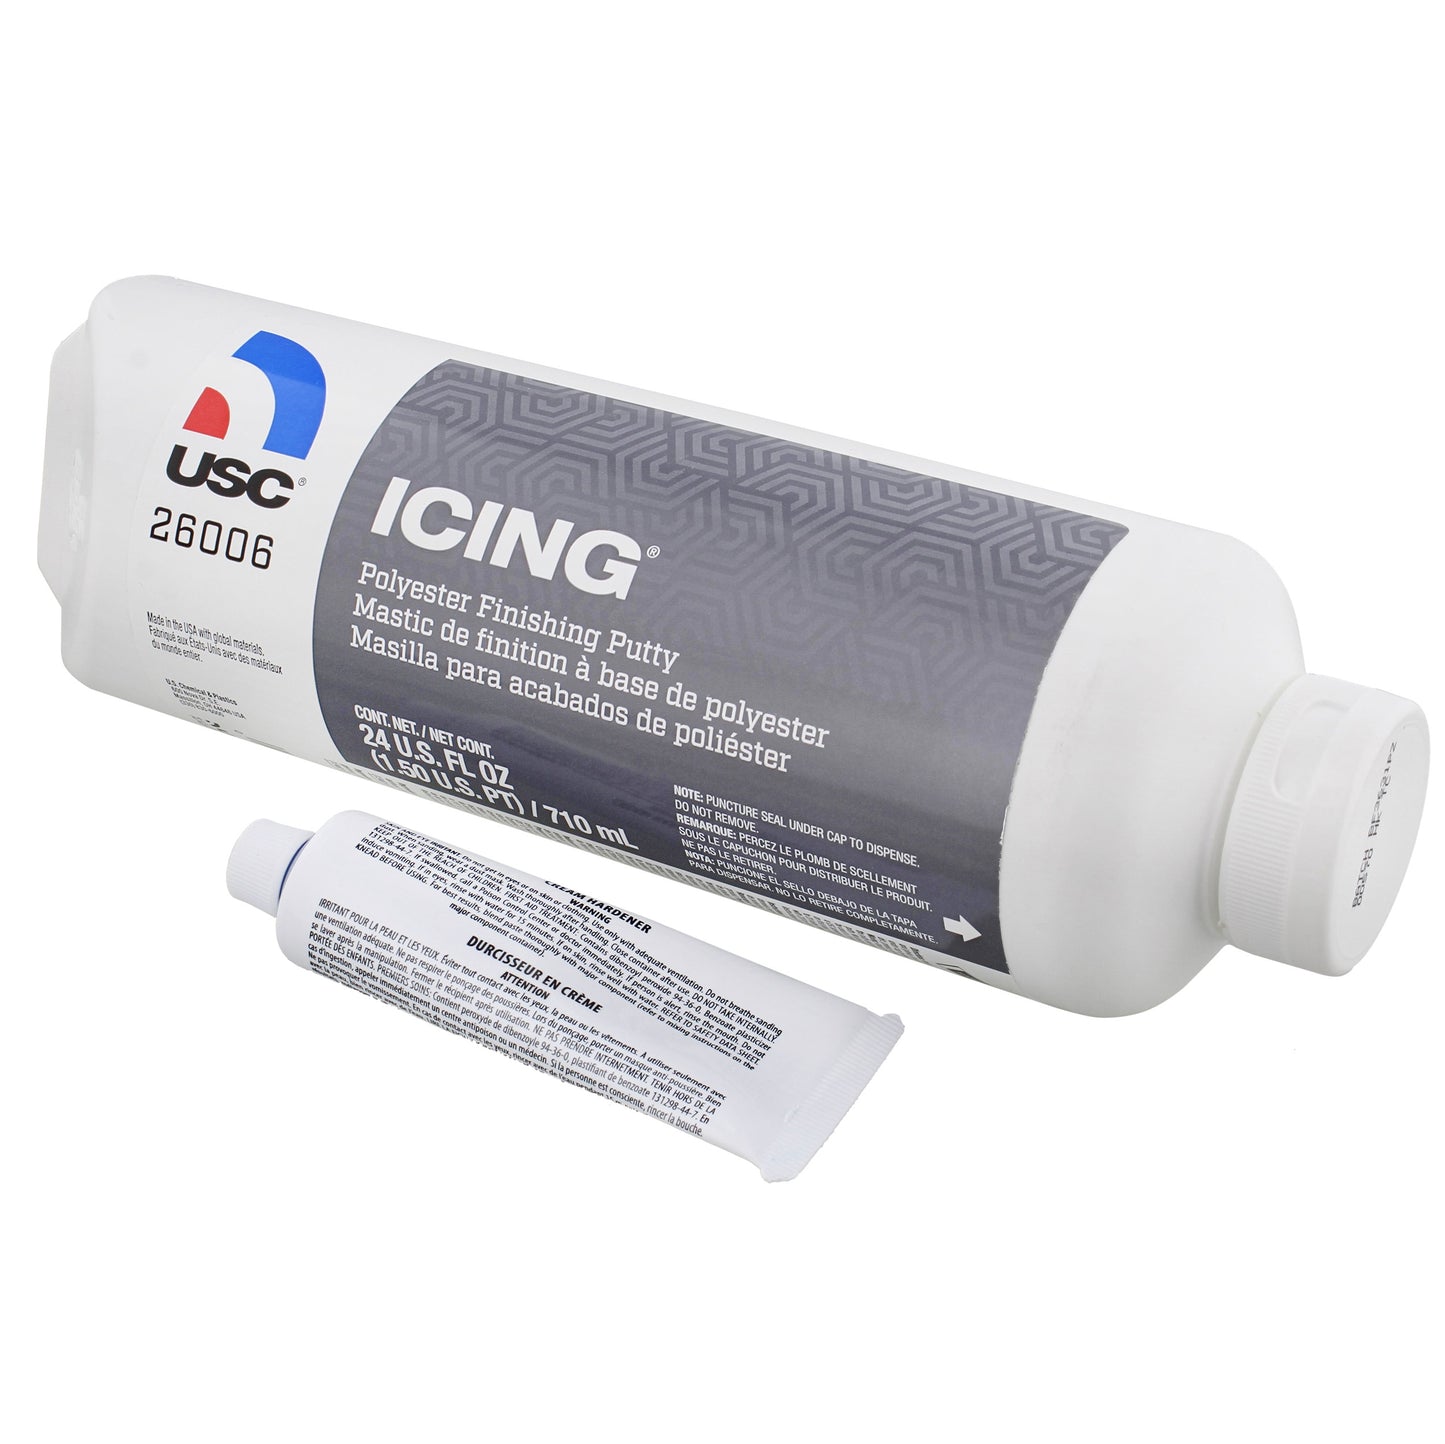 Icing Glazing and Finishing Filler Putty 24 oz tube